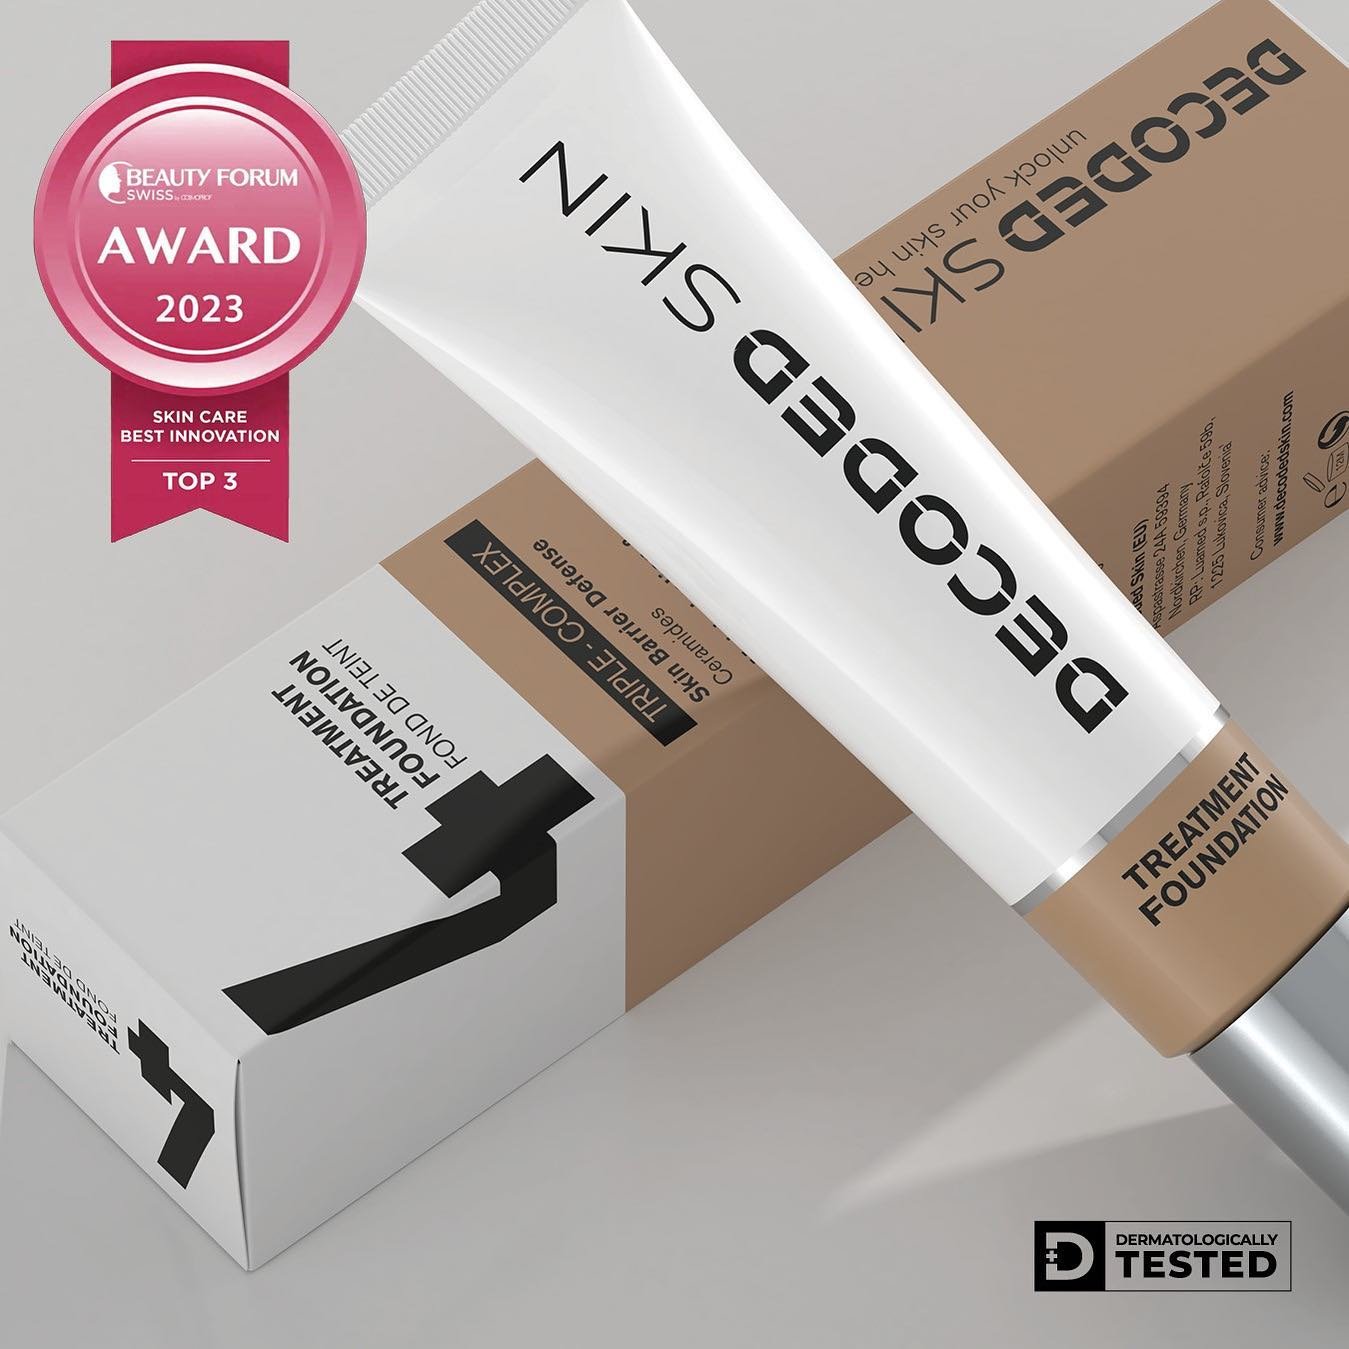 Decoded is already up for an award🏆I am not surprised. We waited so long for this and we absolutely love it. 

✨5 great shades 
✨Beautiful natural coverage.